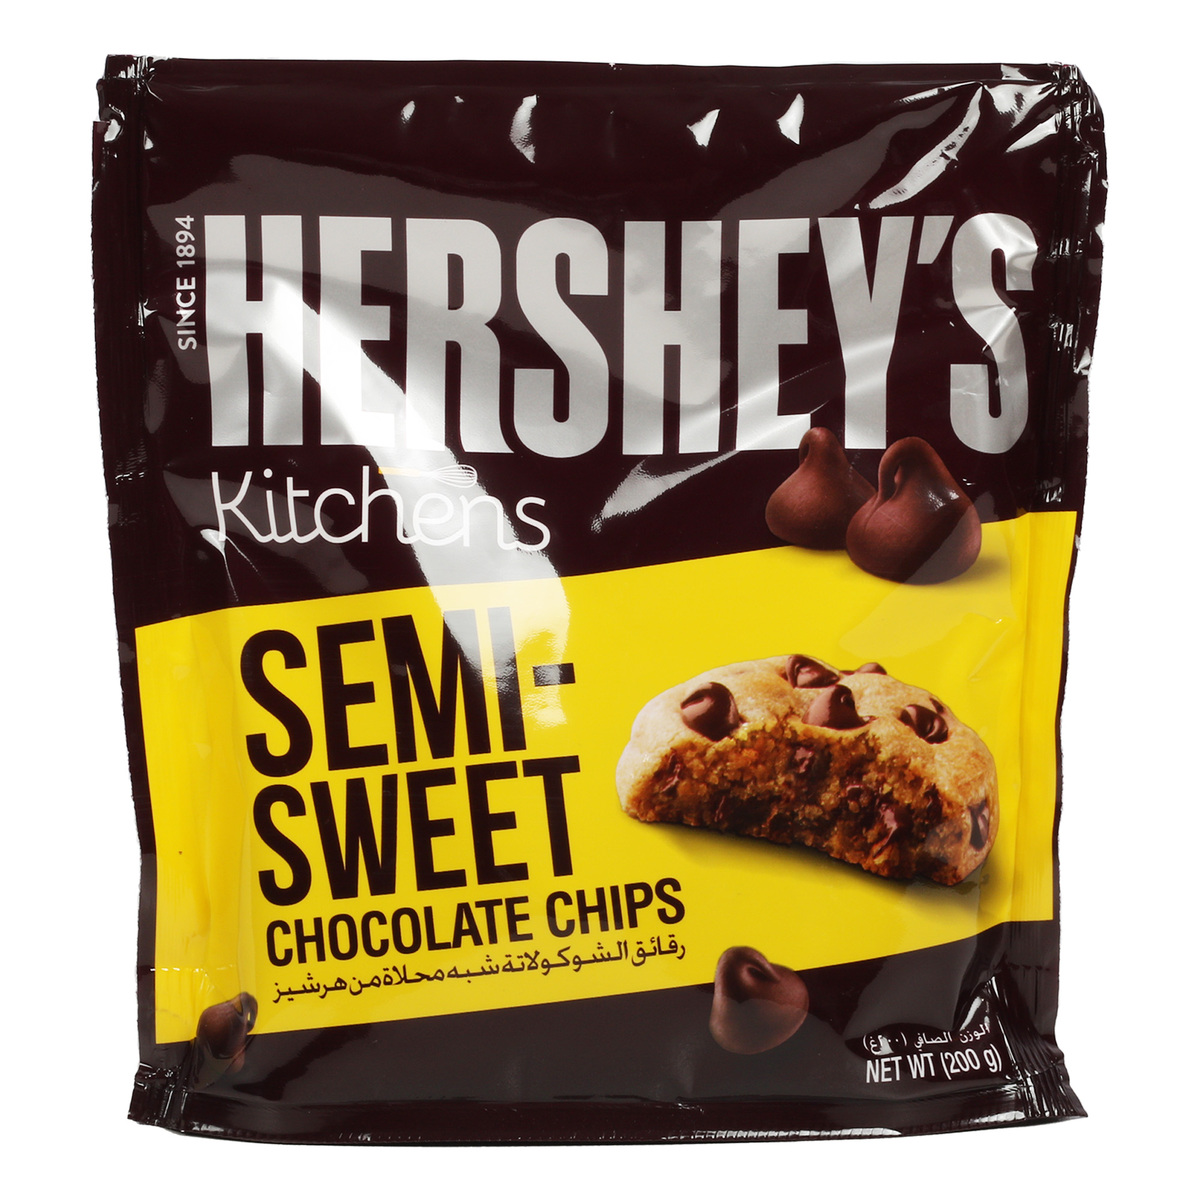 Hershey's Kitchens Semi-Sweet Chocolate Chips Value Pack 200 g